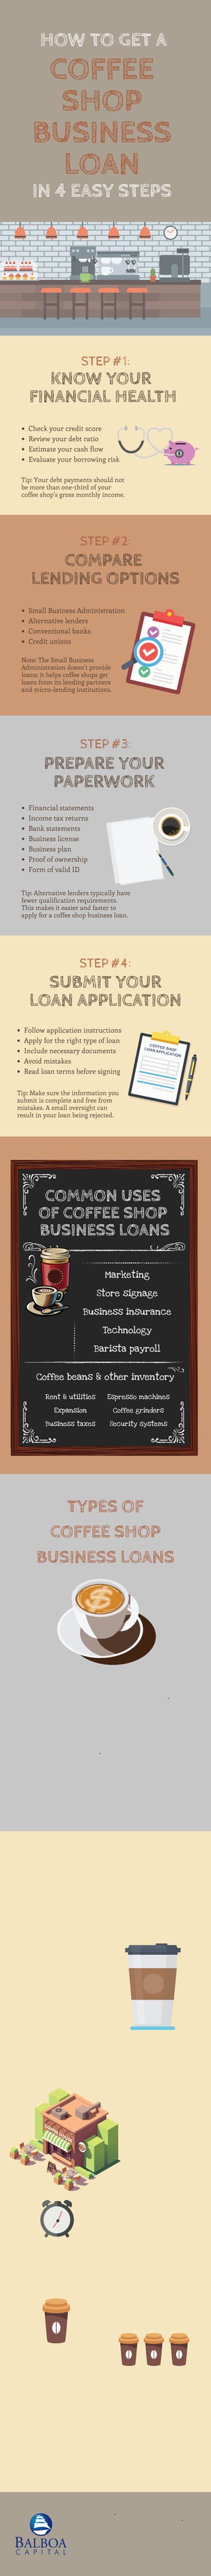 HOW TO GET A 
COFFEE
SHOP
BUSINESS
LOAN
IN 4 EASY STEPS
KNOW YOUR
FINANCIAL HEALTH
Check your credit score
Review your debt ratio
Estimate your cash flow
Evaluate your borrowing risk
Tip: Your debt payments should not
be more than one-third of your
coffee shop's gross monthly income.
STEP #1:
COMPARE
LENDING OPTIONS
Small Business Administration
Alternative lenders
Conventional banks
Credit unions
Note: The Small Business
Administration doesn't provide
loans; it helps coffee shops get
loans from its lending partners
and micro-lending institutions.
STEP #2:
Financial statements
Income tax returns
Bank statements
Business license
Business plan
Proof of ownership
Form of valid ID
Tip: Alternative lenders typically have
fewer qualification requirements.
This makes it easier and faster to
apply for a coffee shop business loan.
PREPARE YOUR
PAPERWORK
STEP #3:
Follow application instructions
Apply for the right type of loan
Include necessary documents
Avoid mistakes
Read loan terms before signing
Tip: Make sure the information you
submit is complete and free from
mistakes. A small oversight can
result in your loan being rejected.
SUBMIT YOUR
LOAN APPLICATION
STEP #4:
COMMON USES
OF COFFEE SHOP 
BUSINESS LOANS
Marketing
Store signage
Business insurance
Technology
Barista payroll
Coffee beans & other inventory
Rent & utilities
Expansion
Business taxes
Espresso machines
Coffee grinders
Security systems
TYPES OF
COFFEE SHOP
BUSINESS LOANS
LONG-TERM LOAN
This type of loan is generally used to fund a long-term
project, or an expensive strategic growth initiative.
The term length is years rather than months.
UNSECURED LOAN
This option has easier qualification requirements.
Because no collateral is needed to qualify, the rates
are generally higher than other types of loans.
SHORT-TERM LOAN
This type of loan is a good option when funds are
needed to address short-term cash flow issues. As its
name states, the payoff time is short. Term lengths of
up to 18 months are common.
LASTLY, HERE'S WHAT'S
BREWING IN THE U.S.
COFFEE INDUSTRY
$50+
BILLIONAnnual revenue of the
U.S. coffee market.
$61 BILLION
Projected annual
revenue of the U.S.
coffee market in 2021.
6% Annual growth rate of
the U.S. coffee market.
65%
Of consumers drink one
cup of coffee per day. 1 in 4Consumers drink three
cups of coffee per day.
38,000+
Number of specialty
coffee shops in the U.S.
6 in 10
Consumers visit a coffee
shop at least once a month.
40%
Of coffee shop revenue is
generated in the morning.
$1,350
How much the average consumer
spends on coffee each year.
60%Of consumers purchase
pastries, muffins, or other
foods at coffee shops.
58%
Of coffee consumed daily is
classified as "gourmet."
This infographic was created by Balboa Capital,
a technology-driven financing company that
provides business owners with fast, hassle-free
solutions to fuel their growth and success.
Sources: Daily Coffee News, Statistica, Forbes,
National Coffee Blog, Beverage Daily, Coffee Talk,
Allegra WCP, Mintel, Food and Wine Magazine
www.balboacapital.com
 